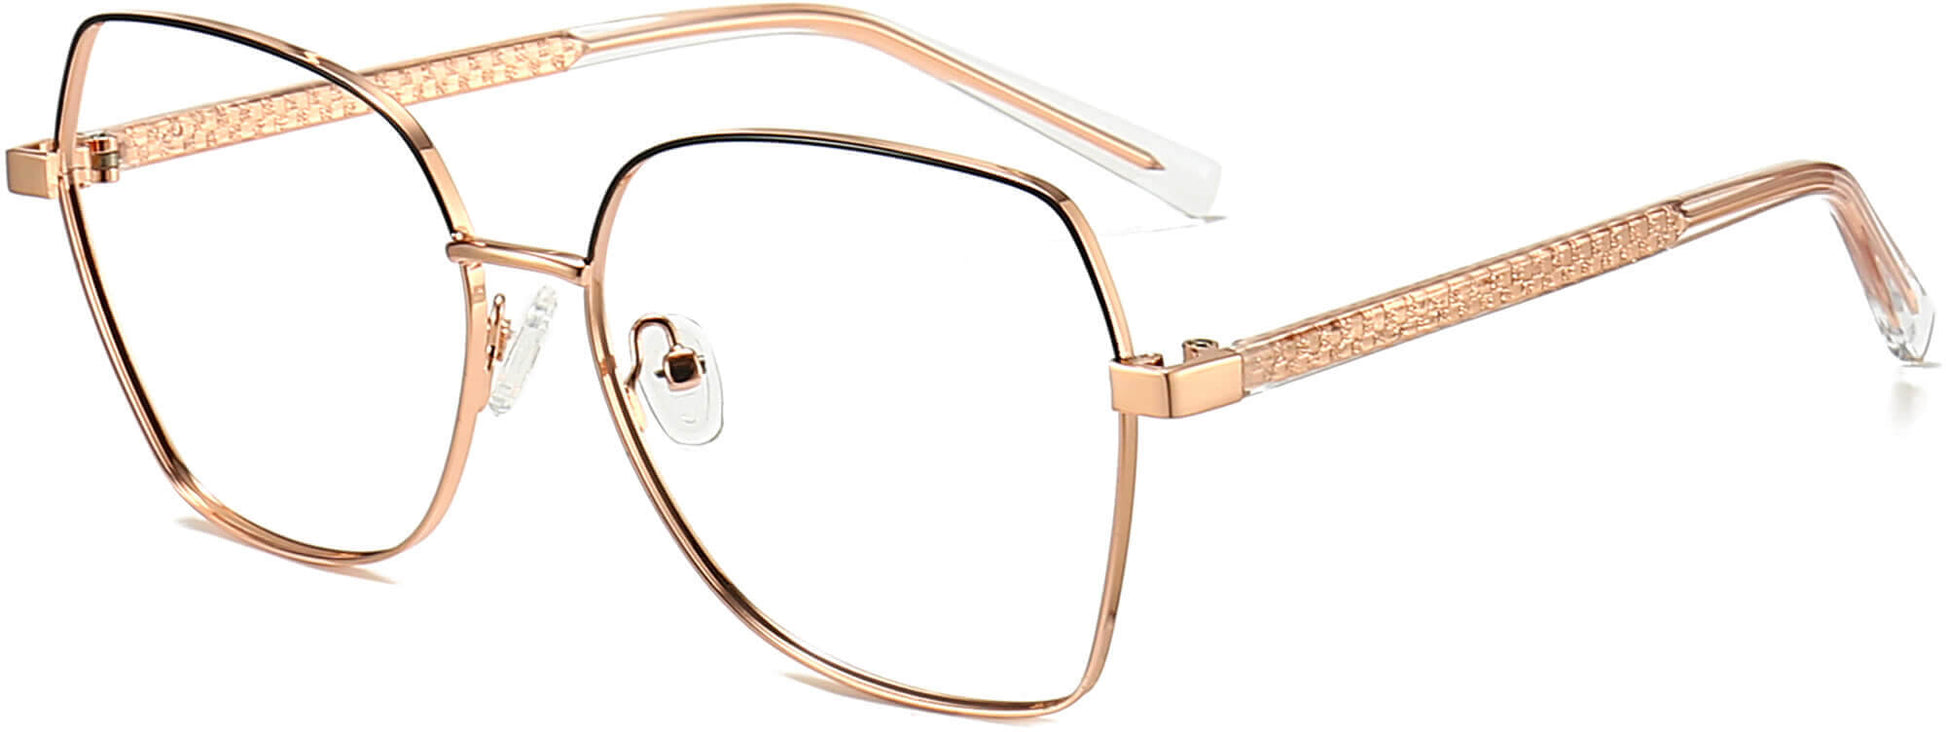 Emely Geometric Gold Eyeglasses from ANRRI, angle view